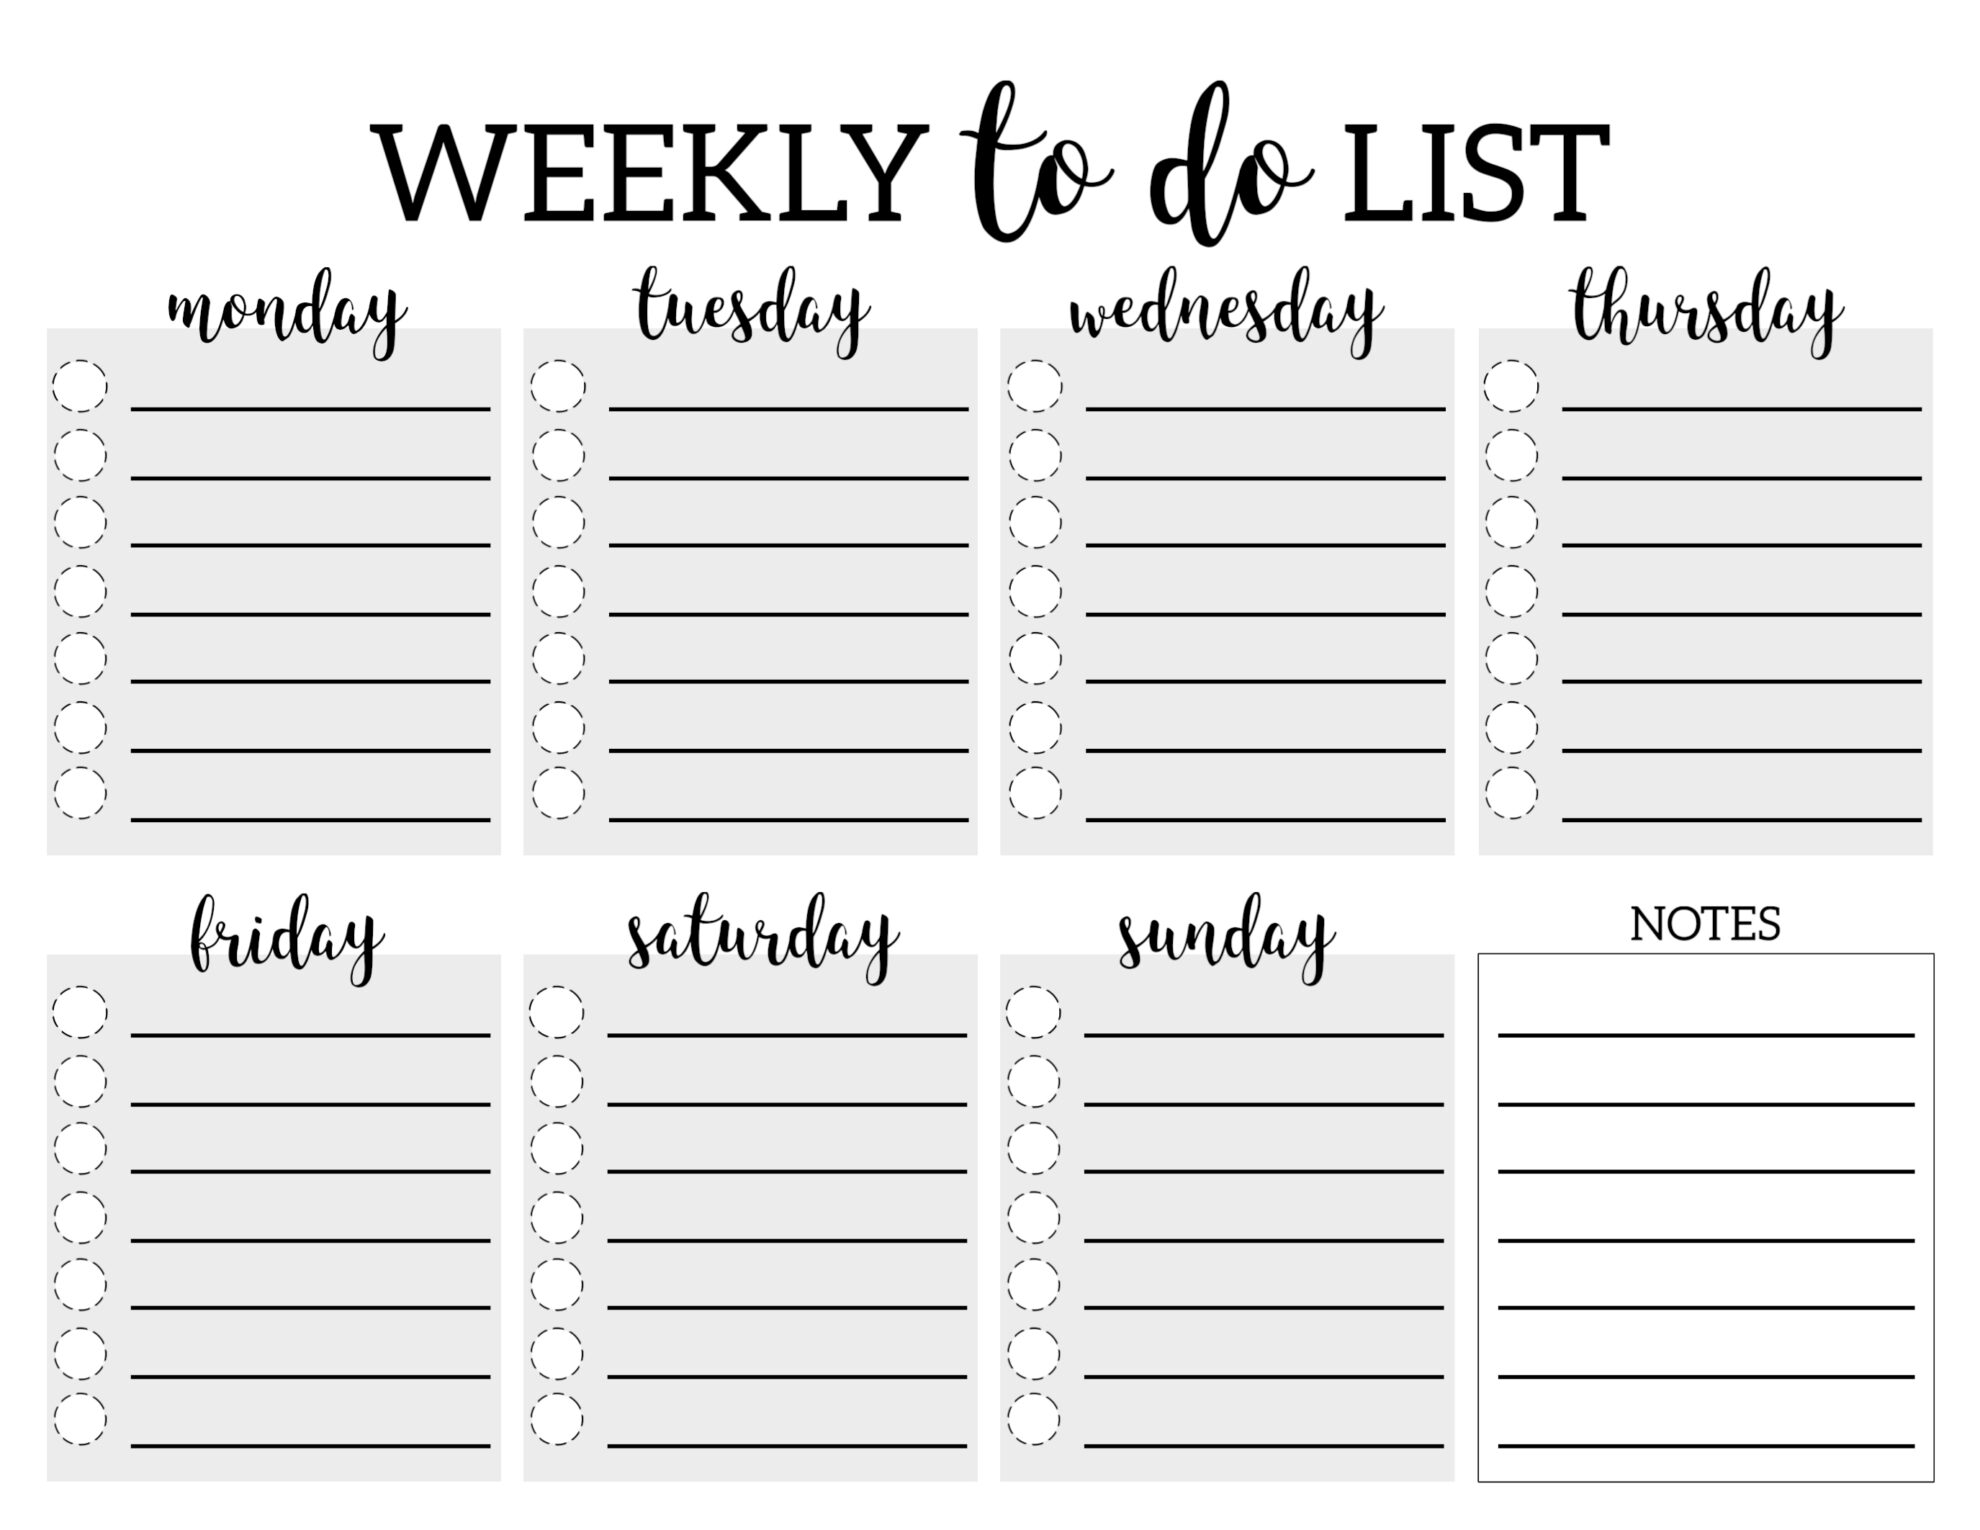 Weekly To Do List Printable Checklist Template  Paper Trail Design Inside Checklist With Boxes Template Within Checklist With Boxes Template